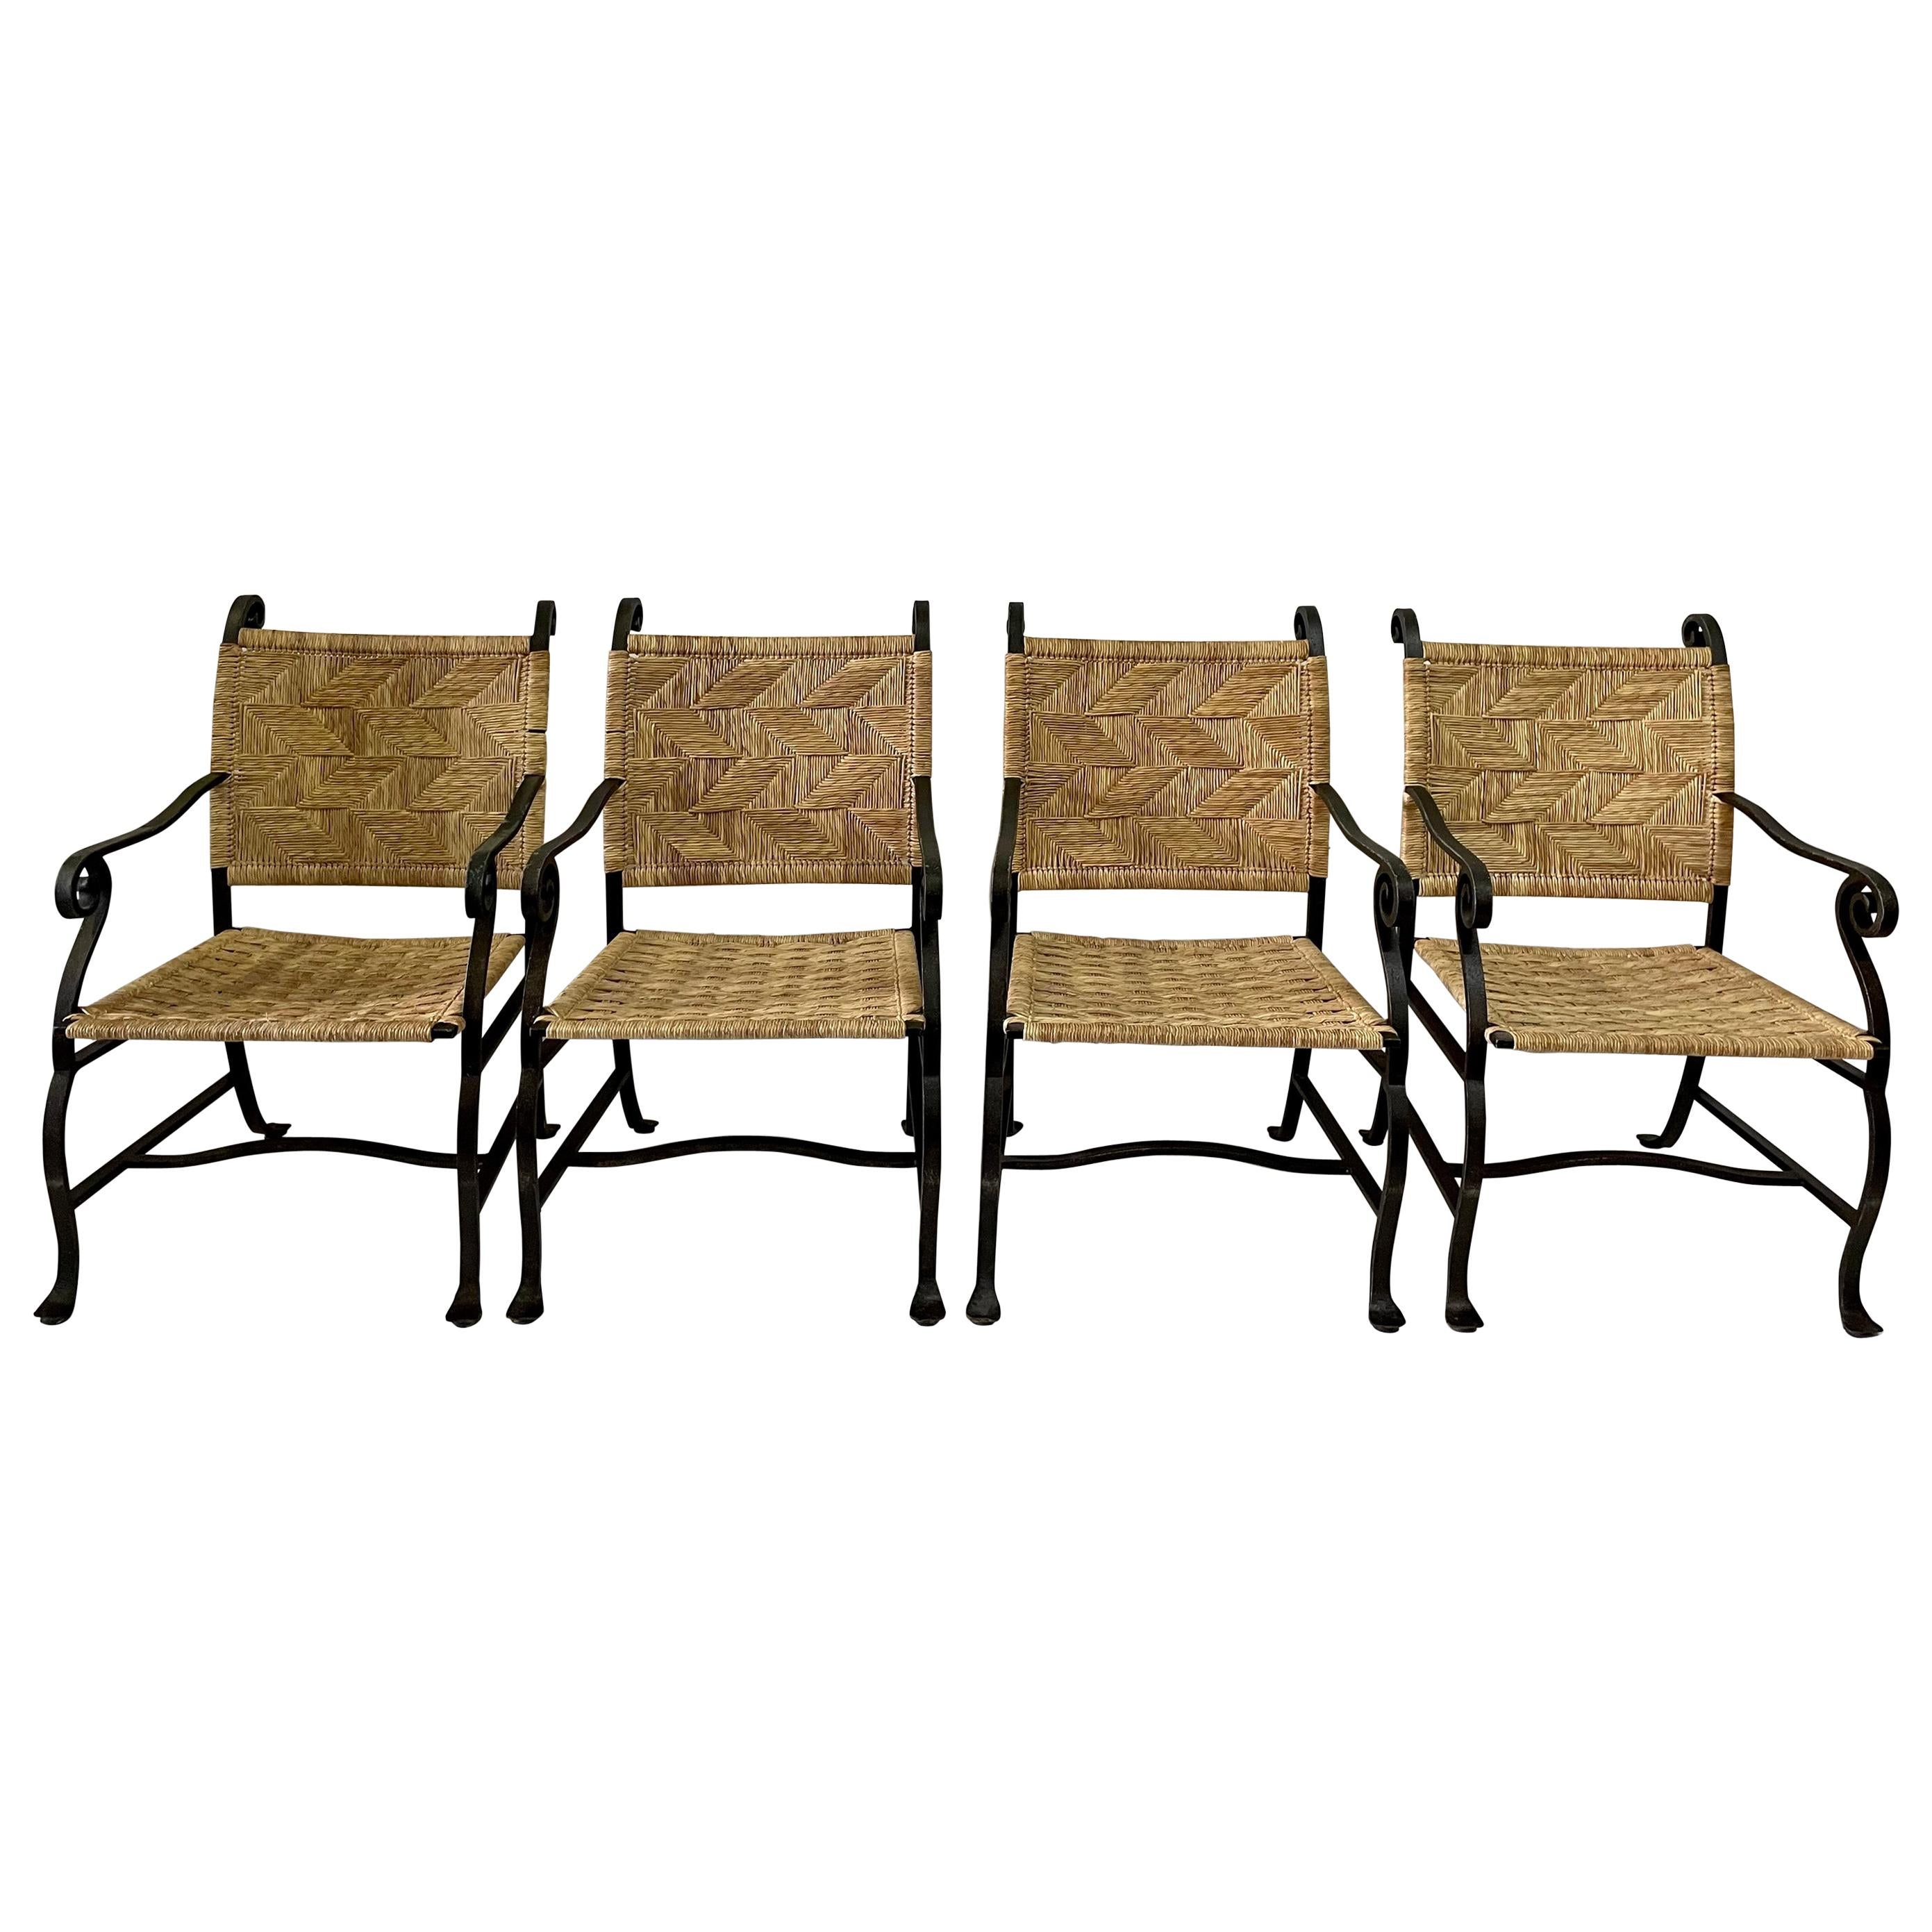 4 Hand Wrought Iron and Woven Raffia Armchairs